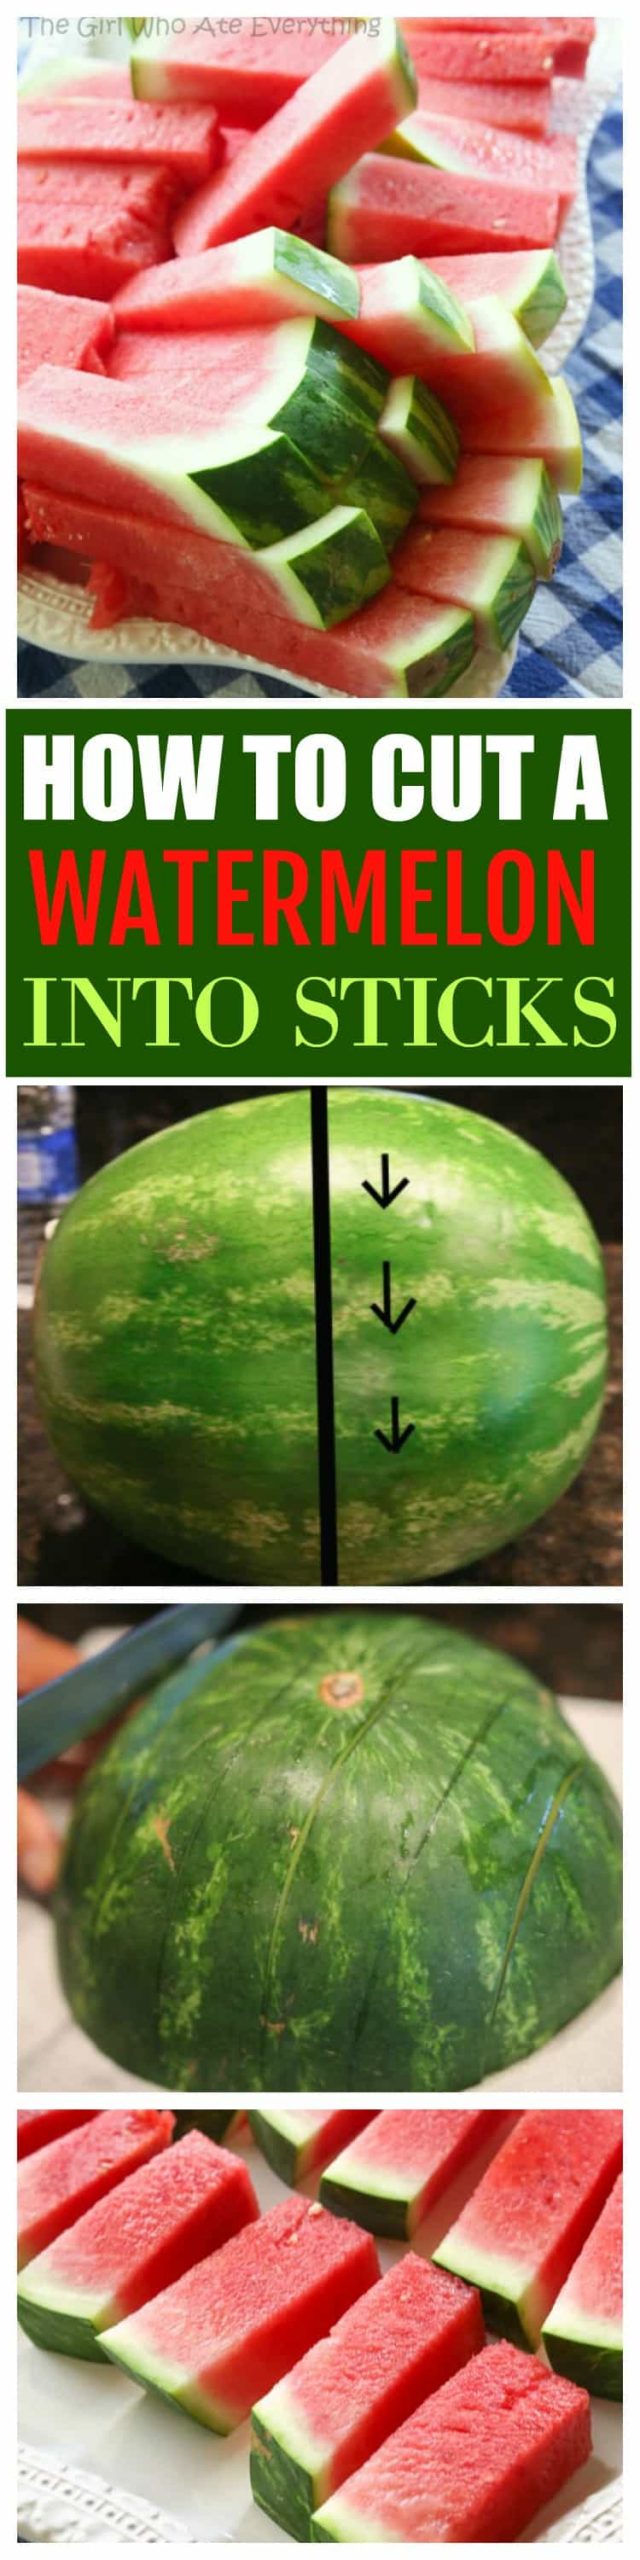 fb image scaled - How to Cut a Watermelon into Sticks